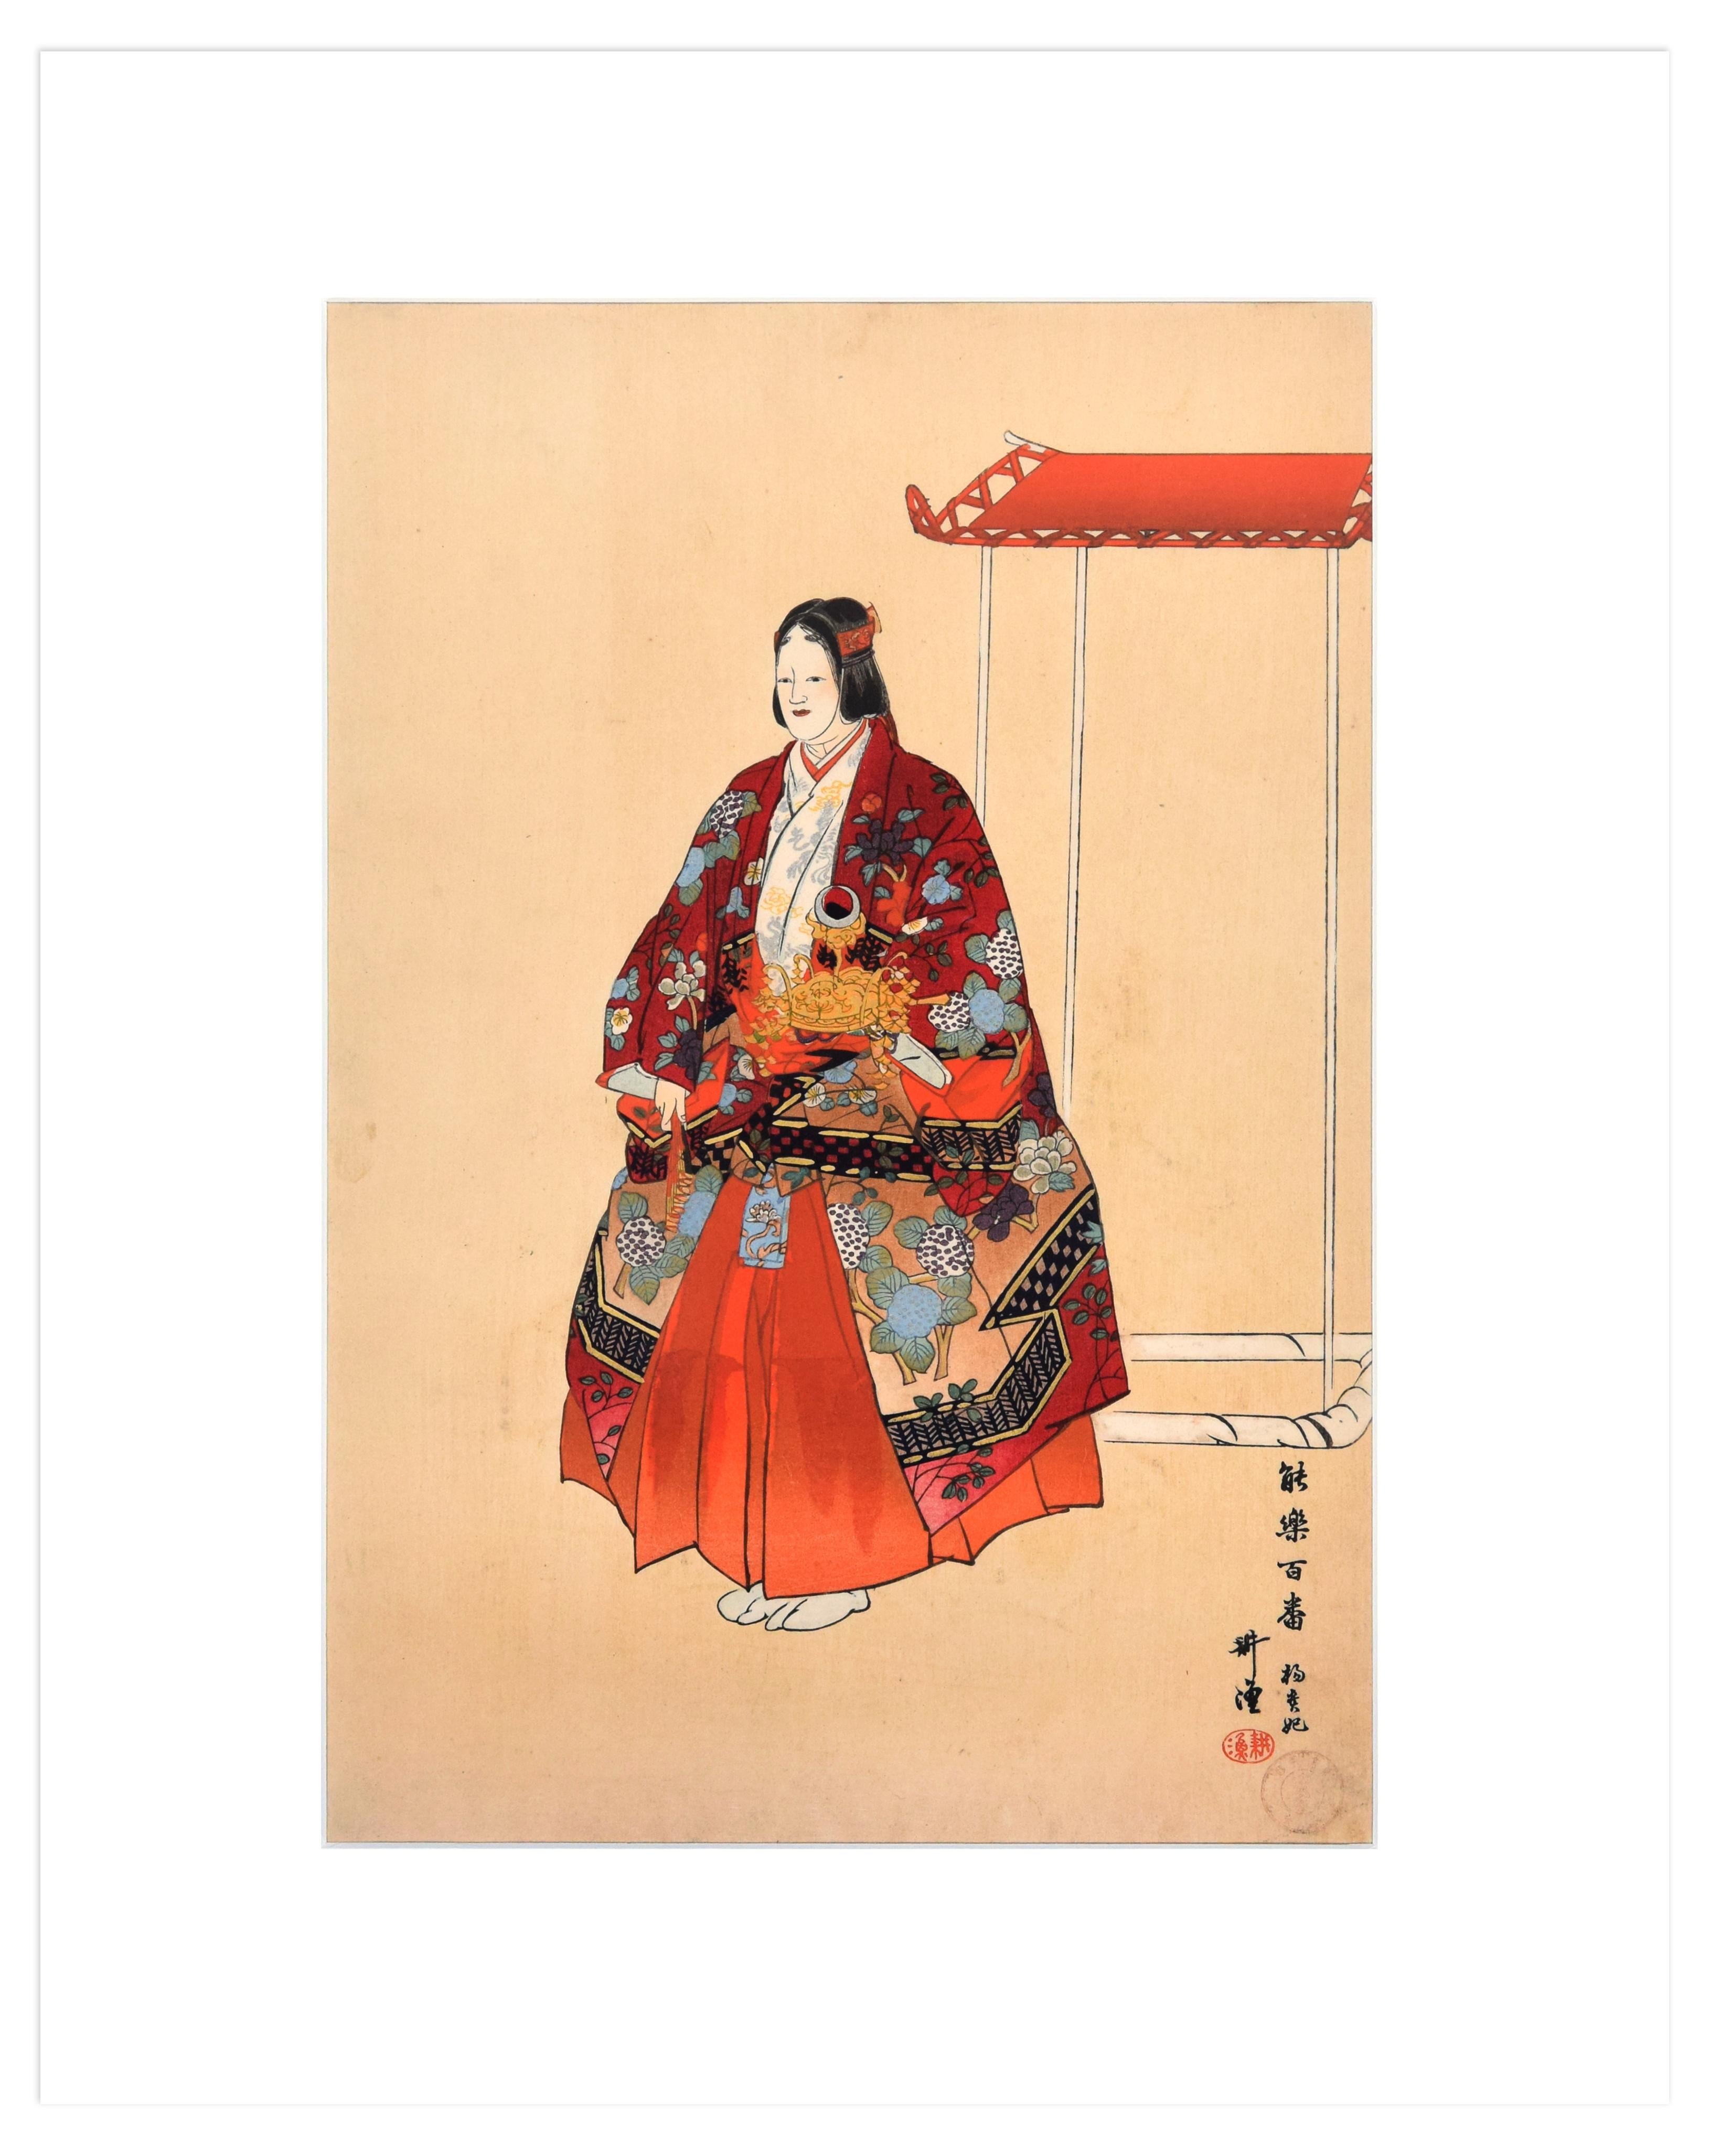 Yokihi is an original print realized by Tsukioka Kôgyo in 1923.

Mixed colored woodblock print. This print is from the series 